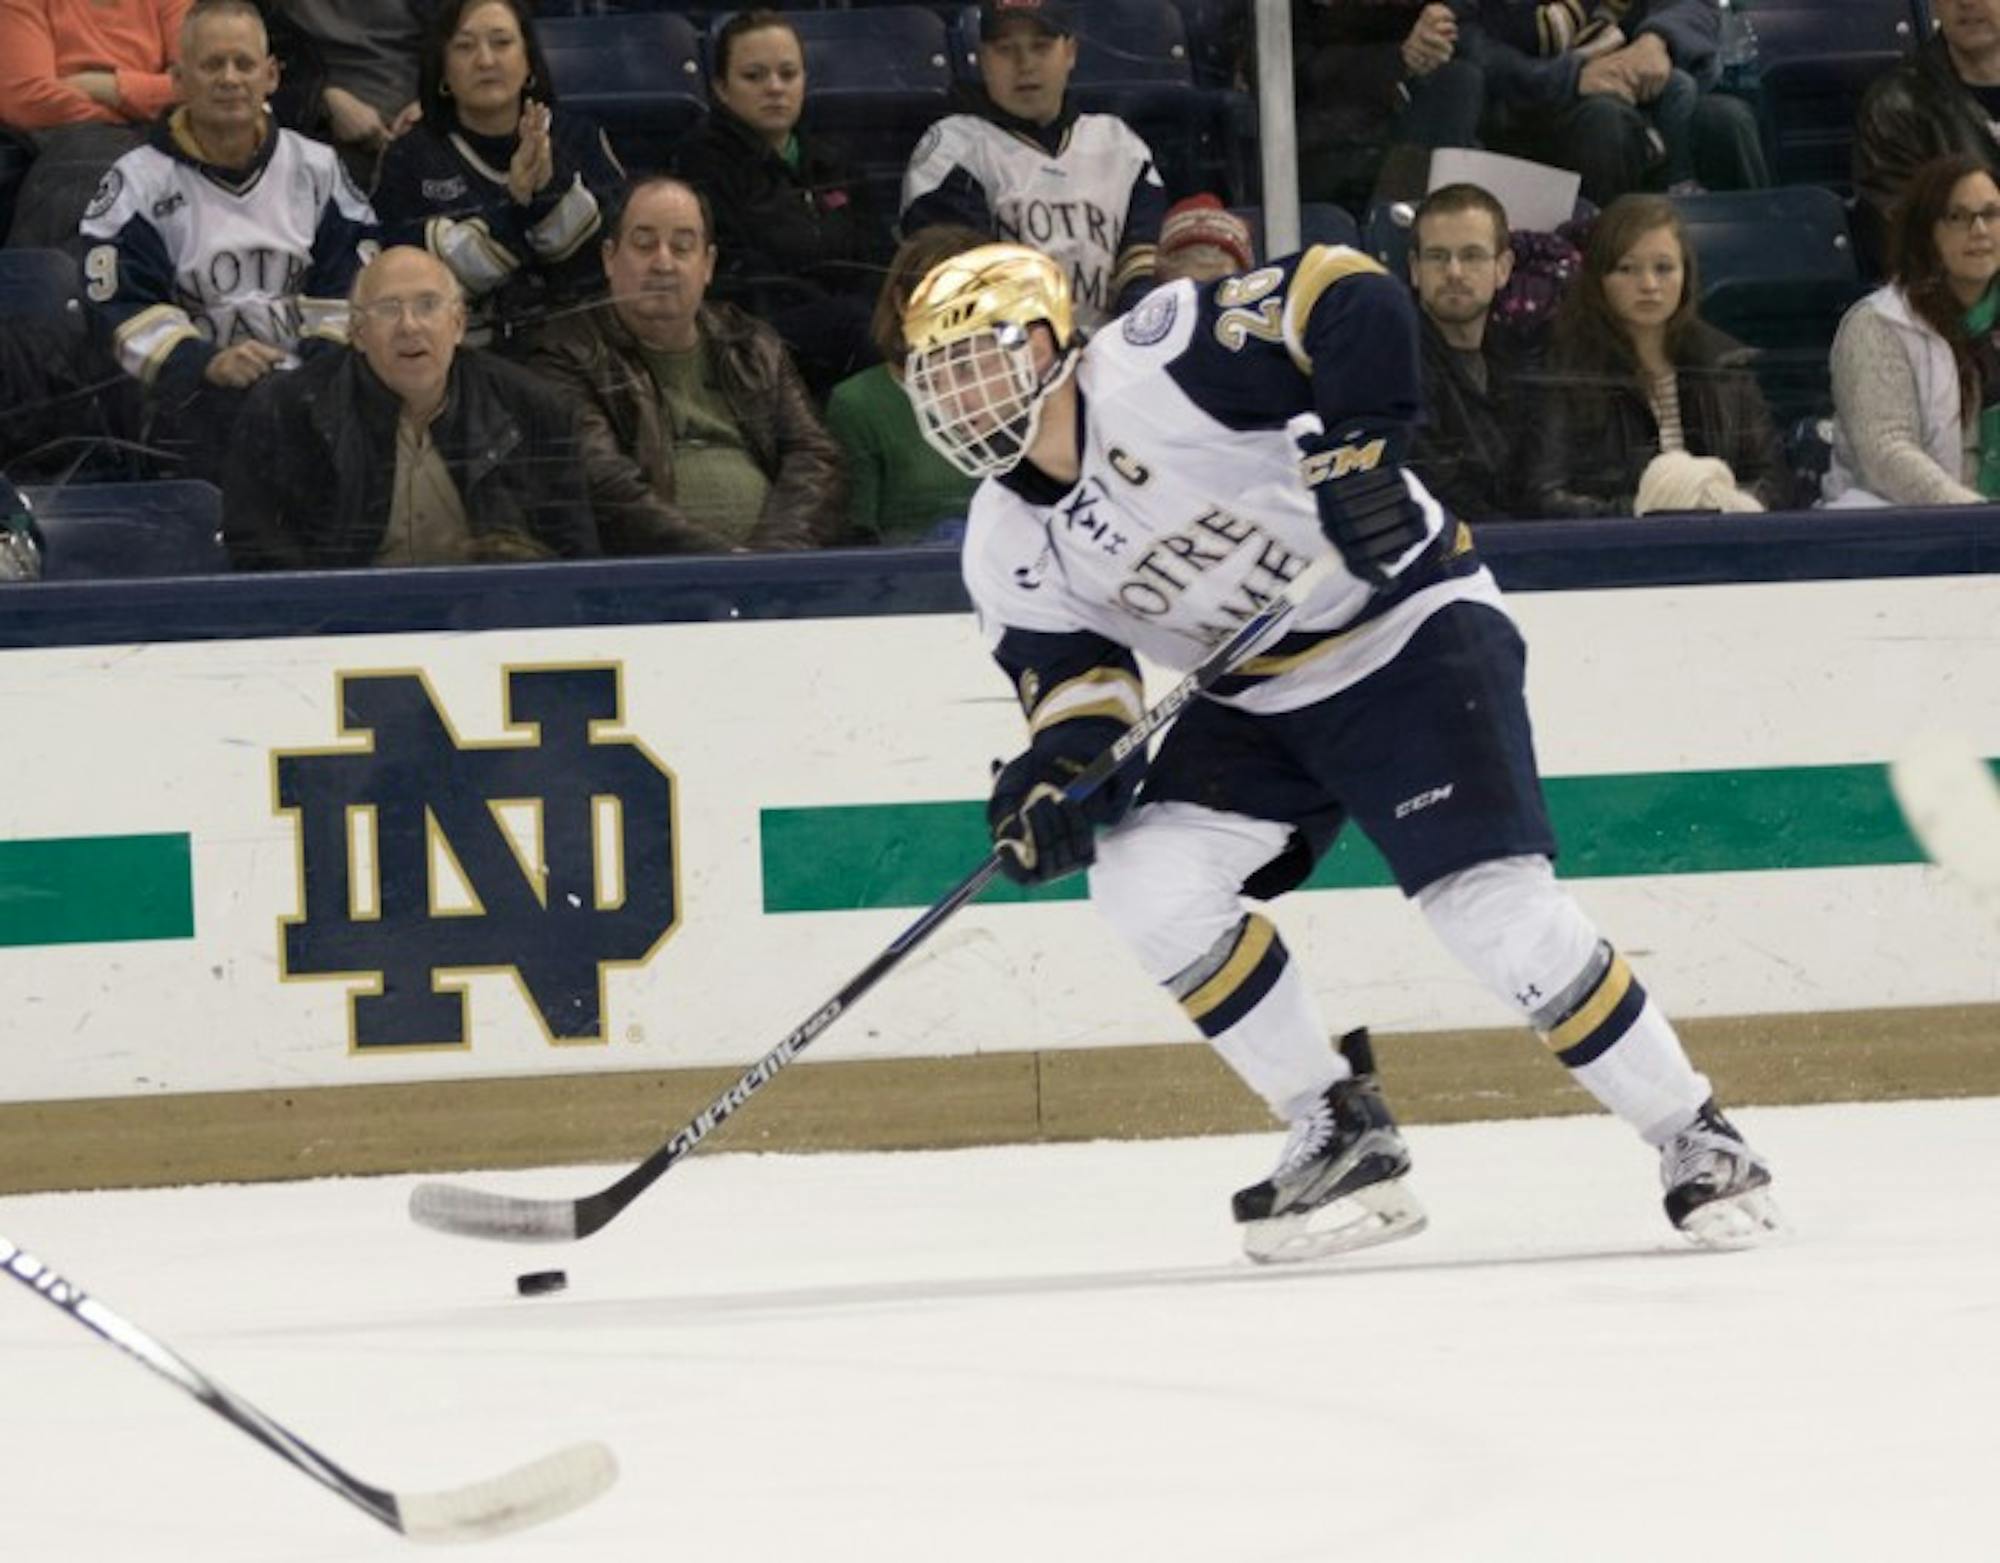 Senior center Steven Fogarty controls the puck during Notre Dame’s 3-1 victory over Massachusetts on Friday at Compton Family Ice Arena. Fogarty scored one goal in the win.